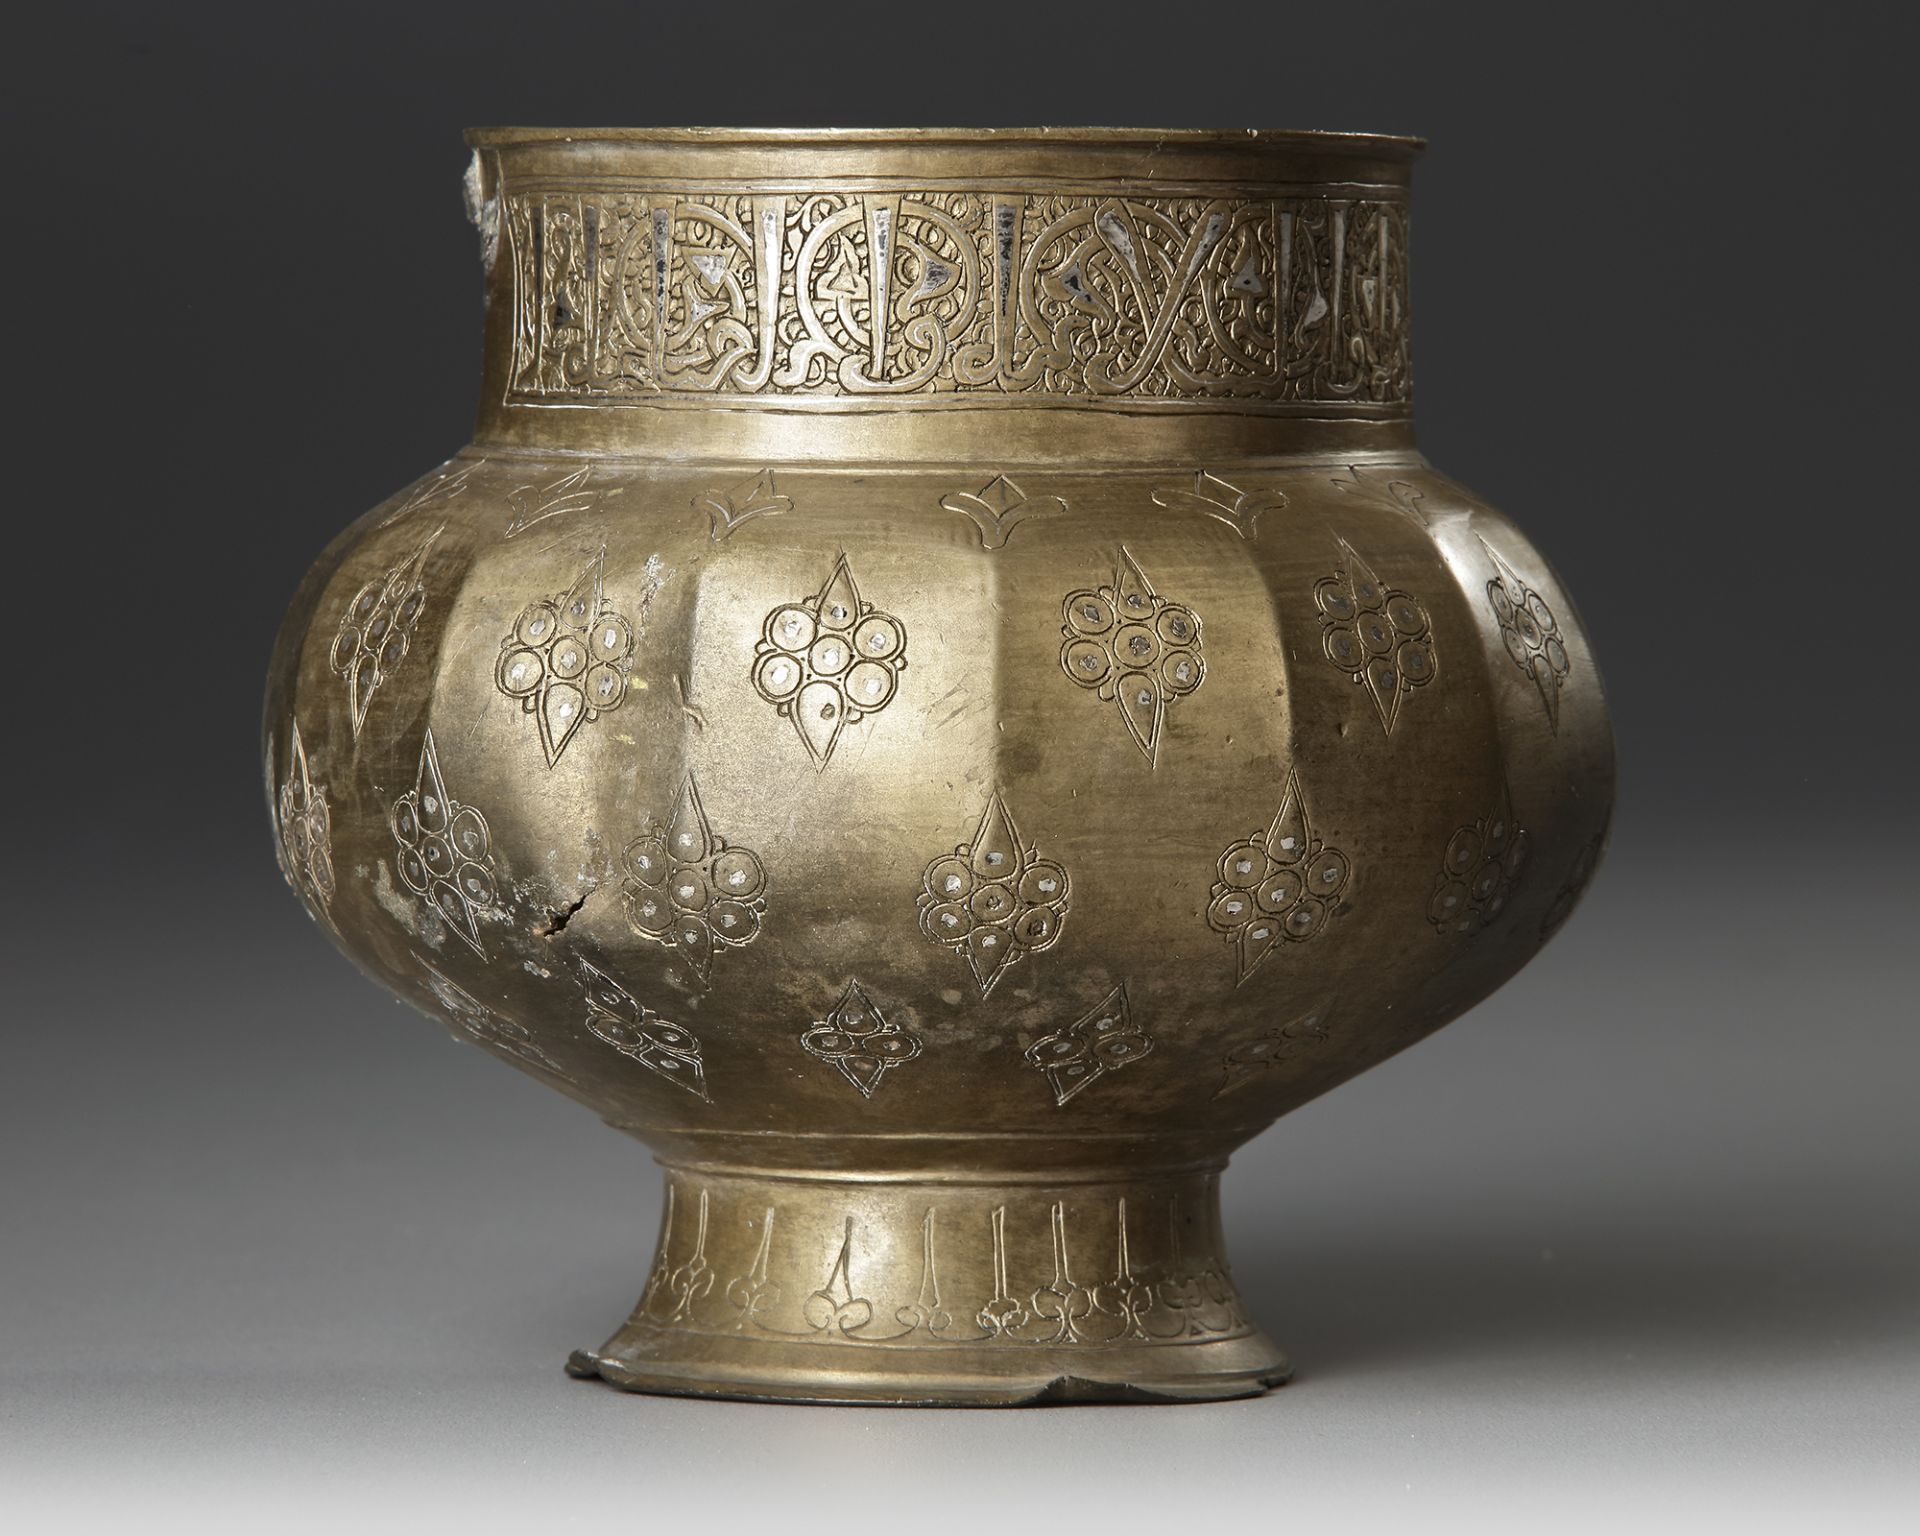 A KHURASAN BRONZE JUG WITH SILVER INLAY, CENTRAL ASIA, 12TH-13TH CENTURY